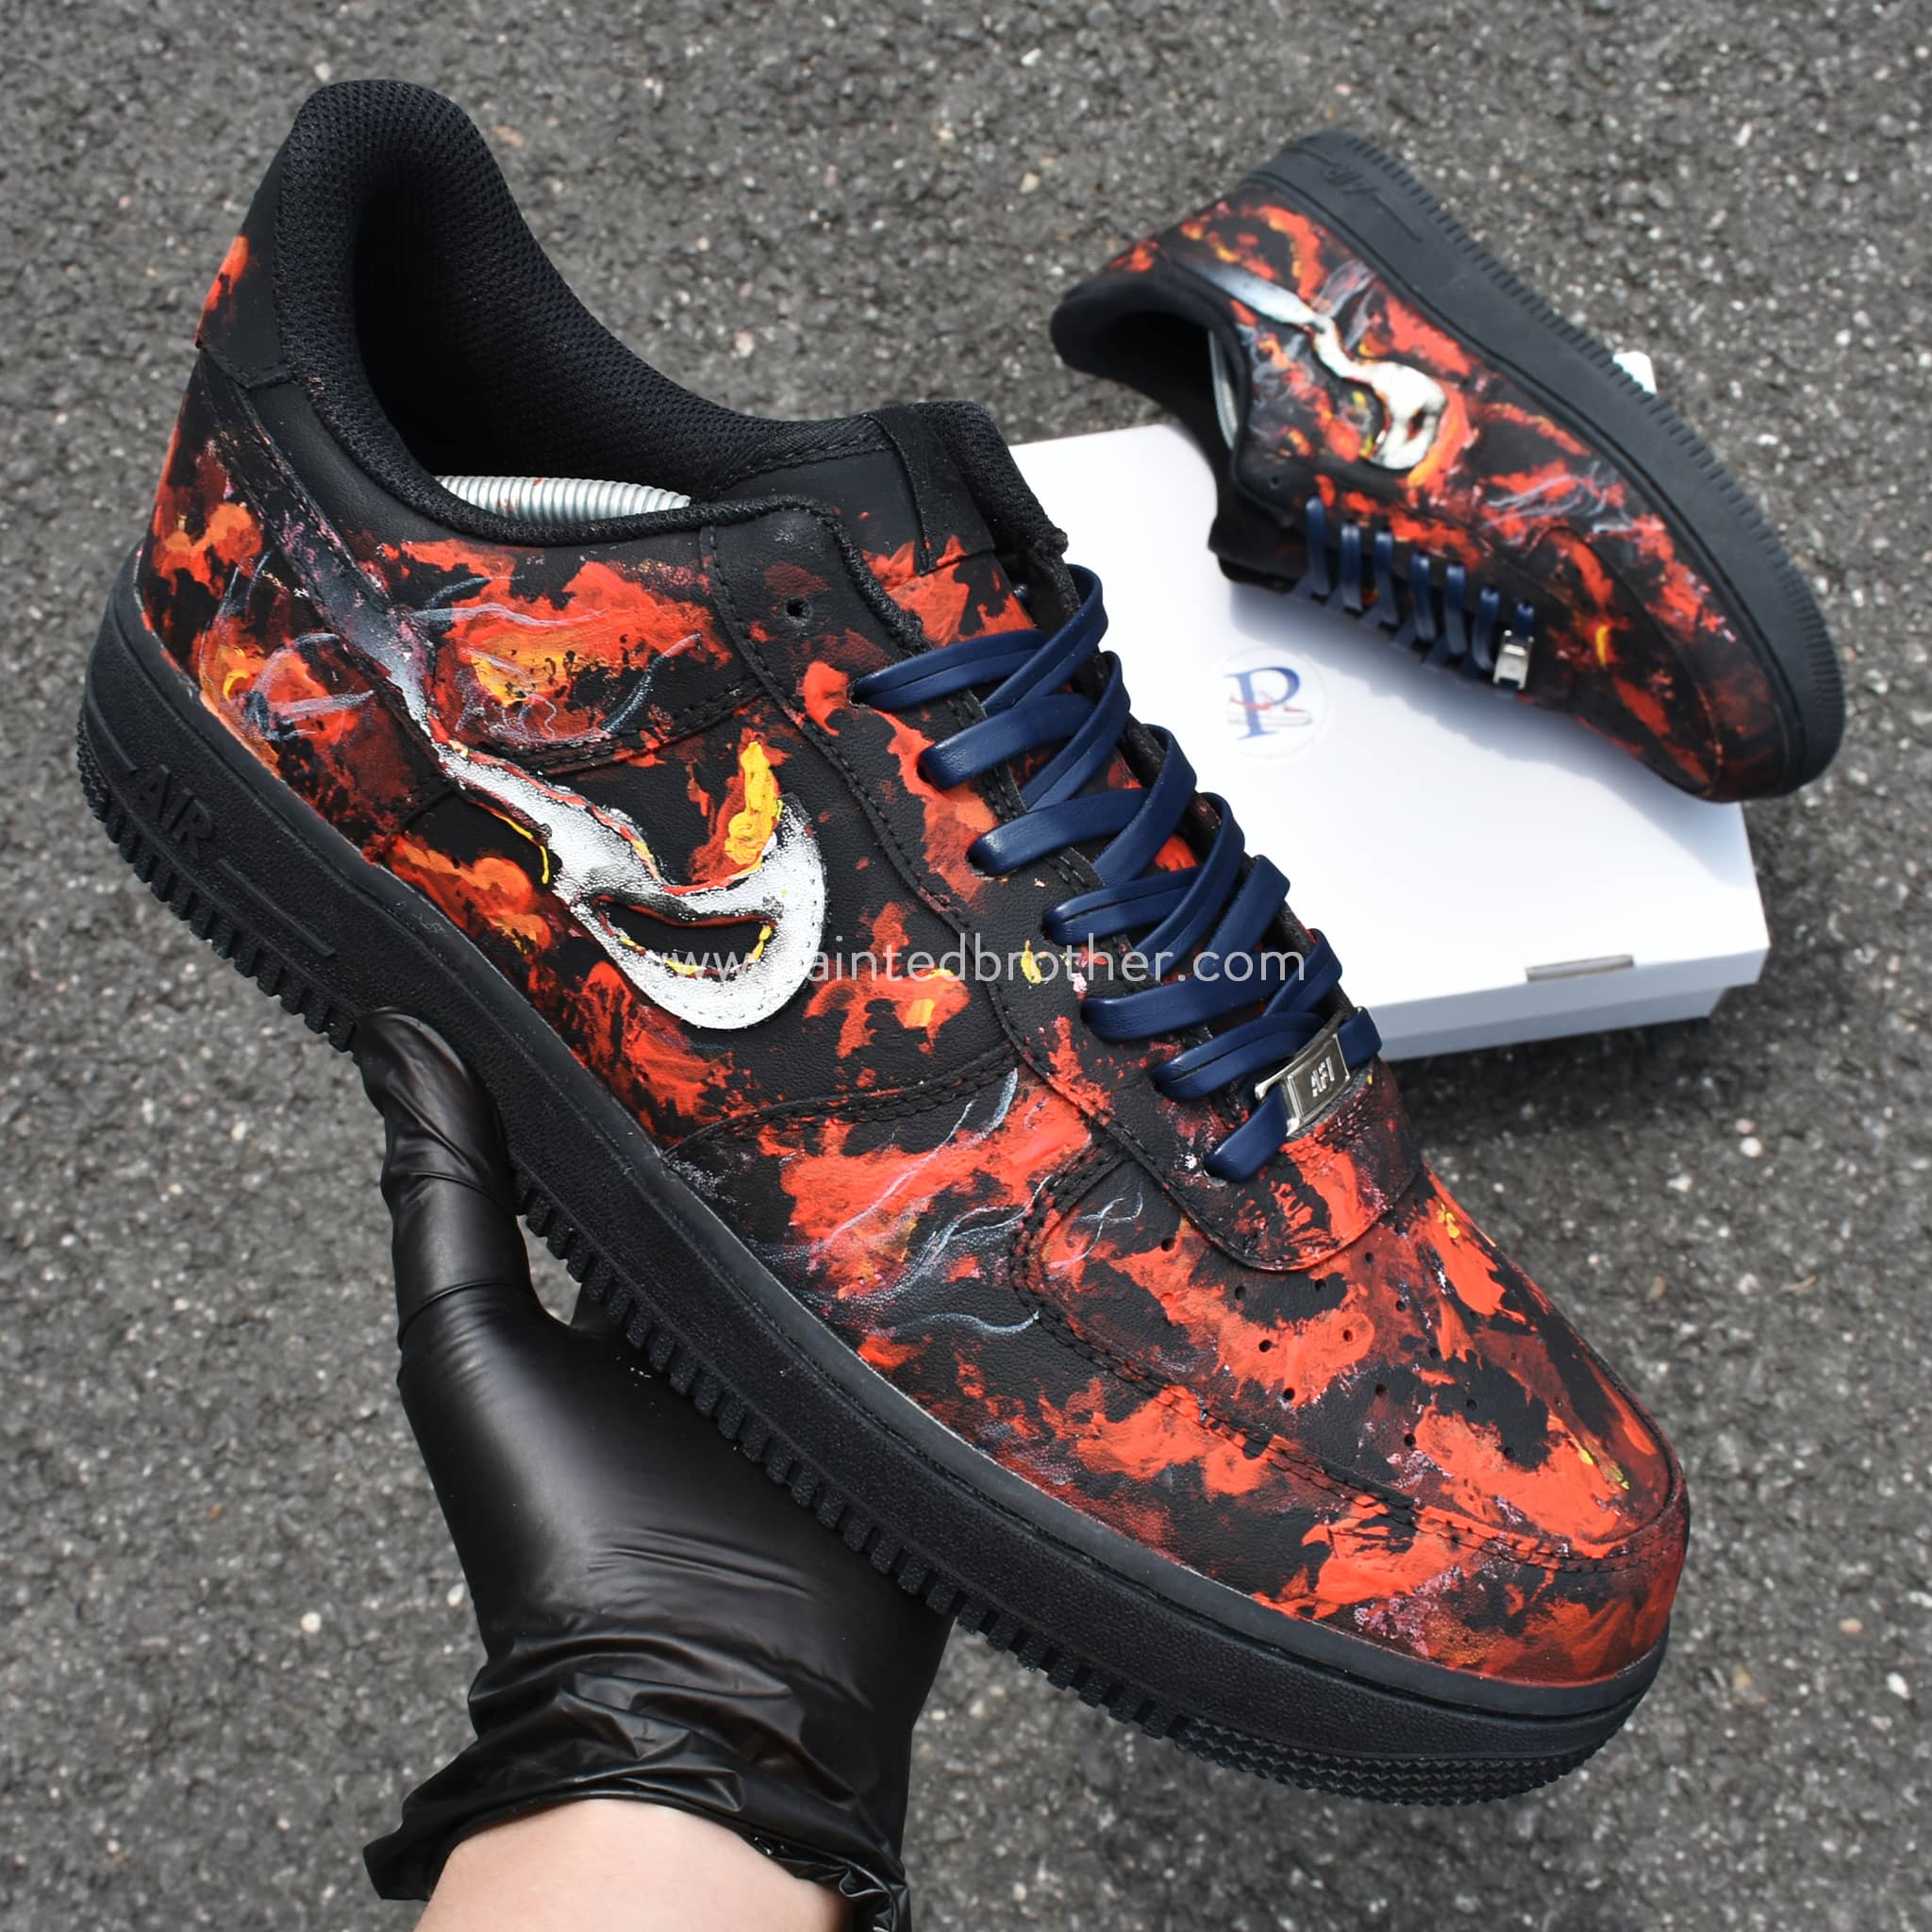 Custom Sneakers Painted Shoes Charcoal Flame Burning Ashes Nike Air  Force 1's-paintedbrother